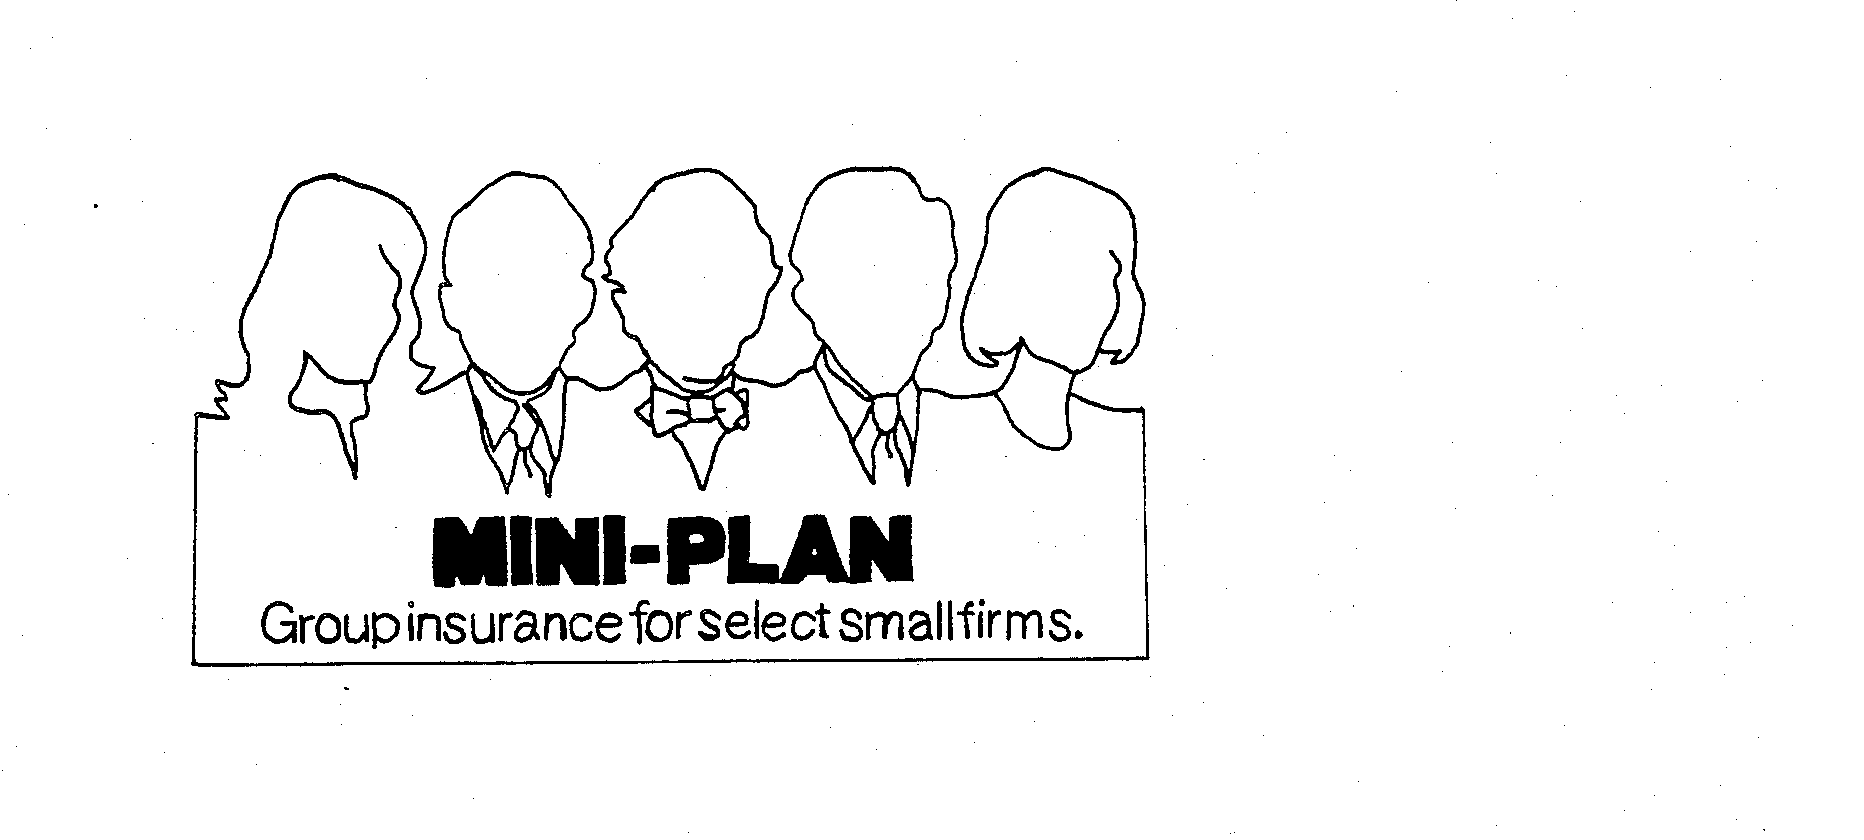  MINI-PLAN GROUP INSURANCE FOR SELECT SMALL FIRMS